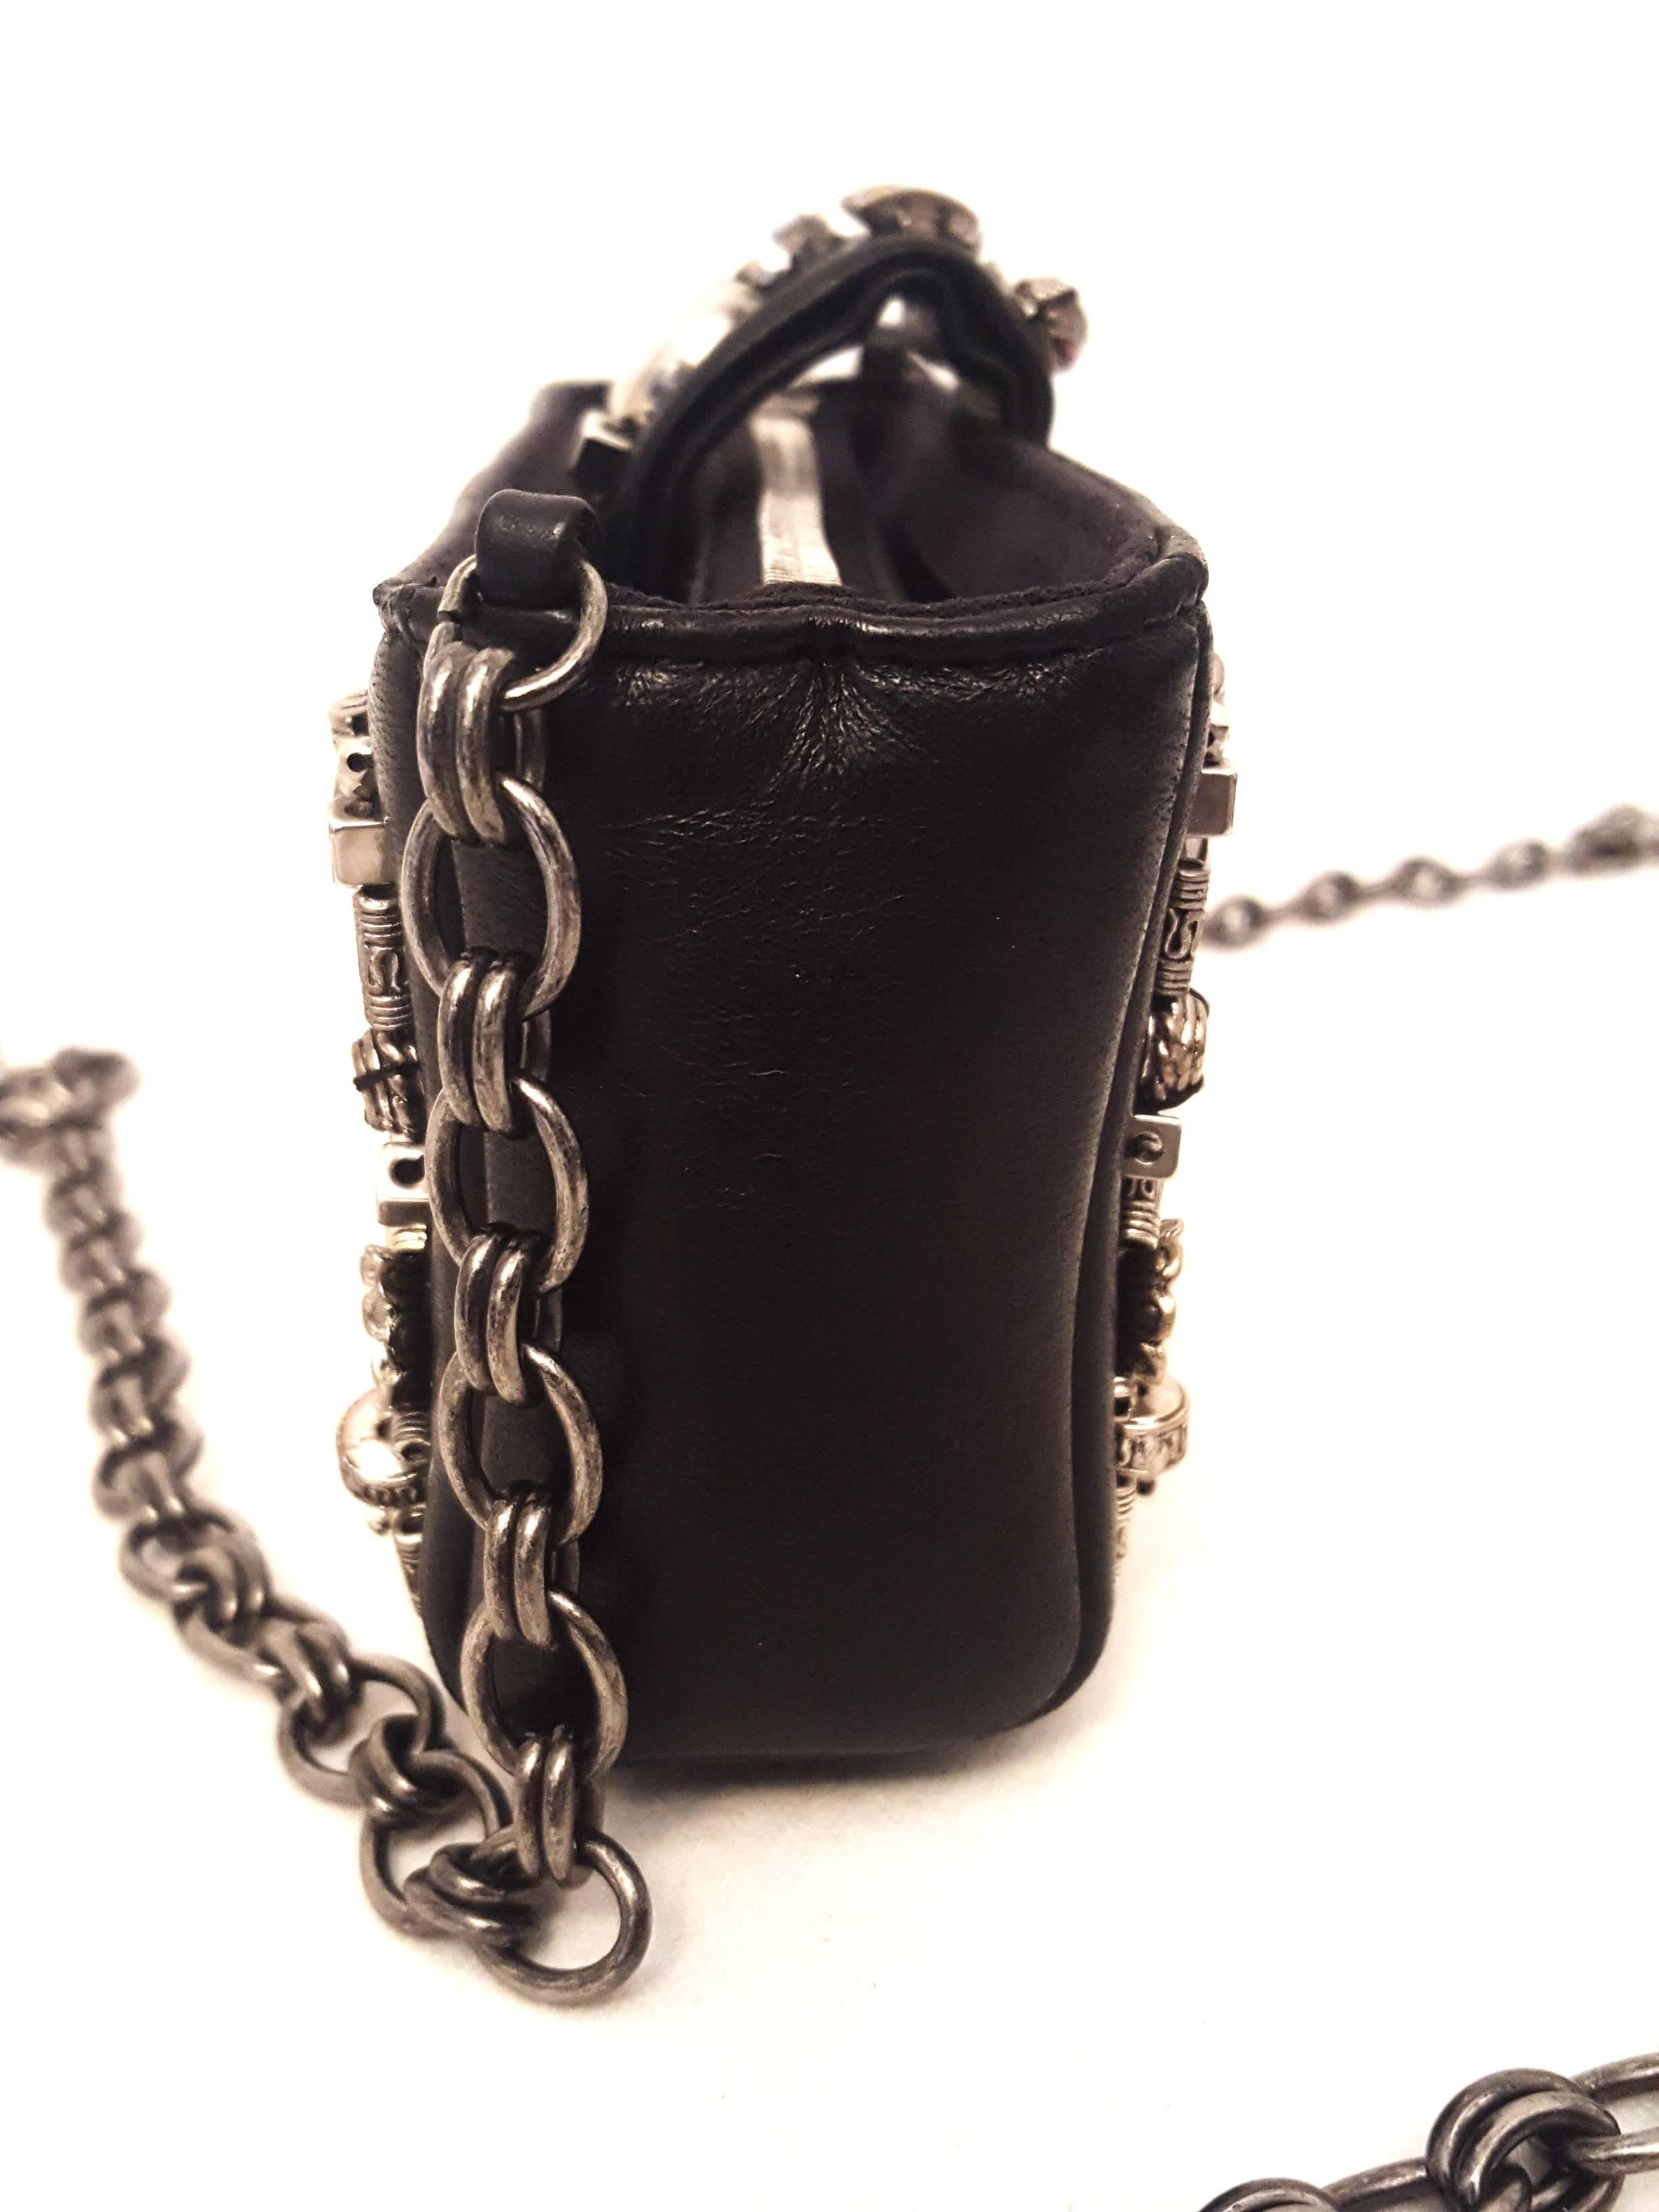 Chanel black leather with pewter tone metal enhanced trinkets at the front, back and on the base of this mini shoulder bag transform it into a veritable treasure!  The long chain strap, also, in pewter tone metal, not the typical Chanel braided